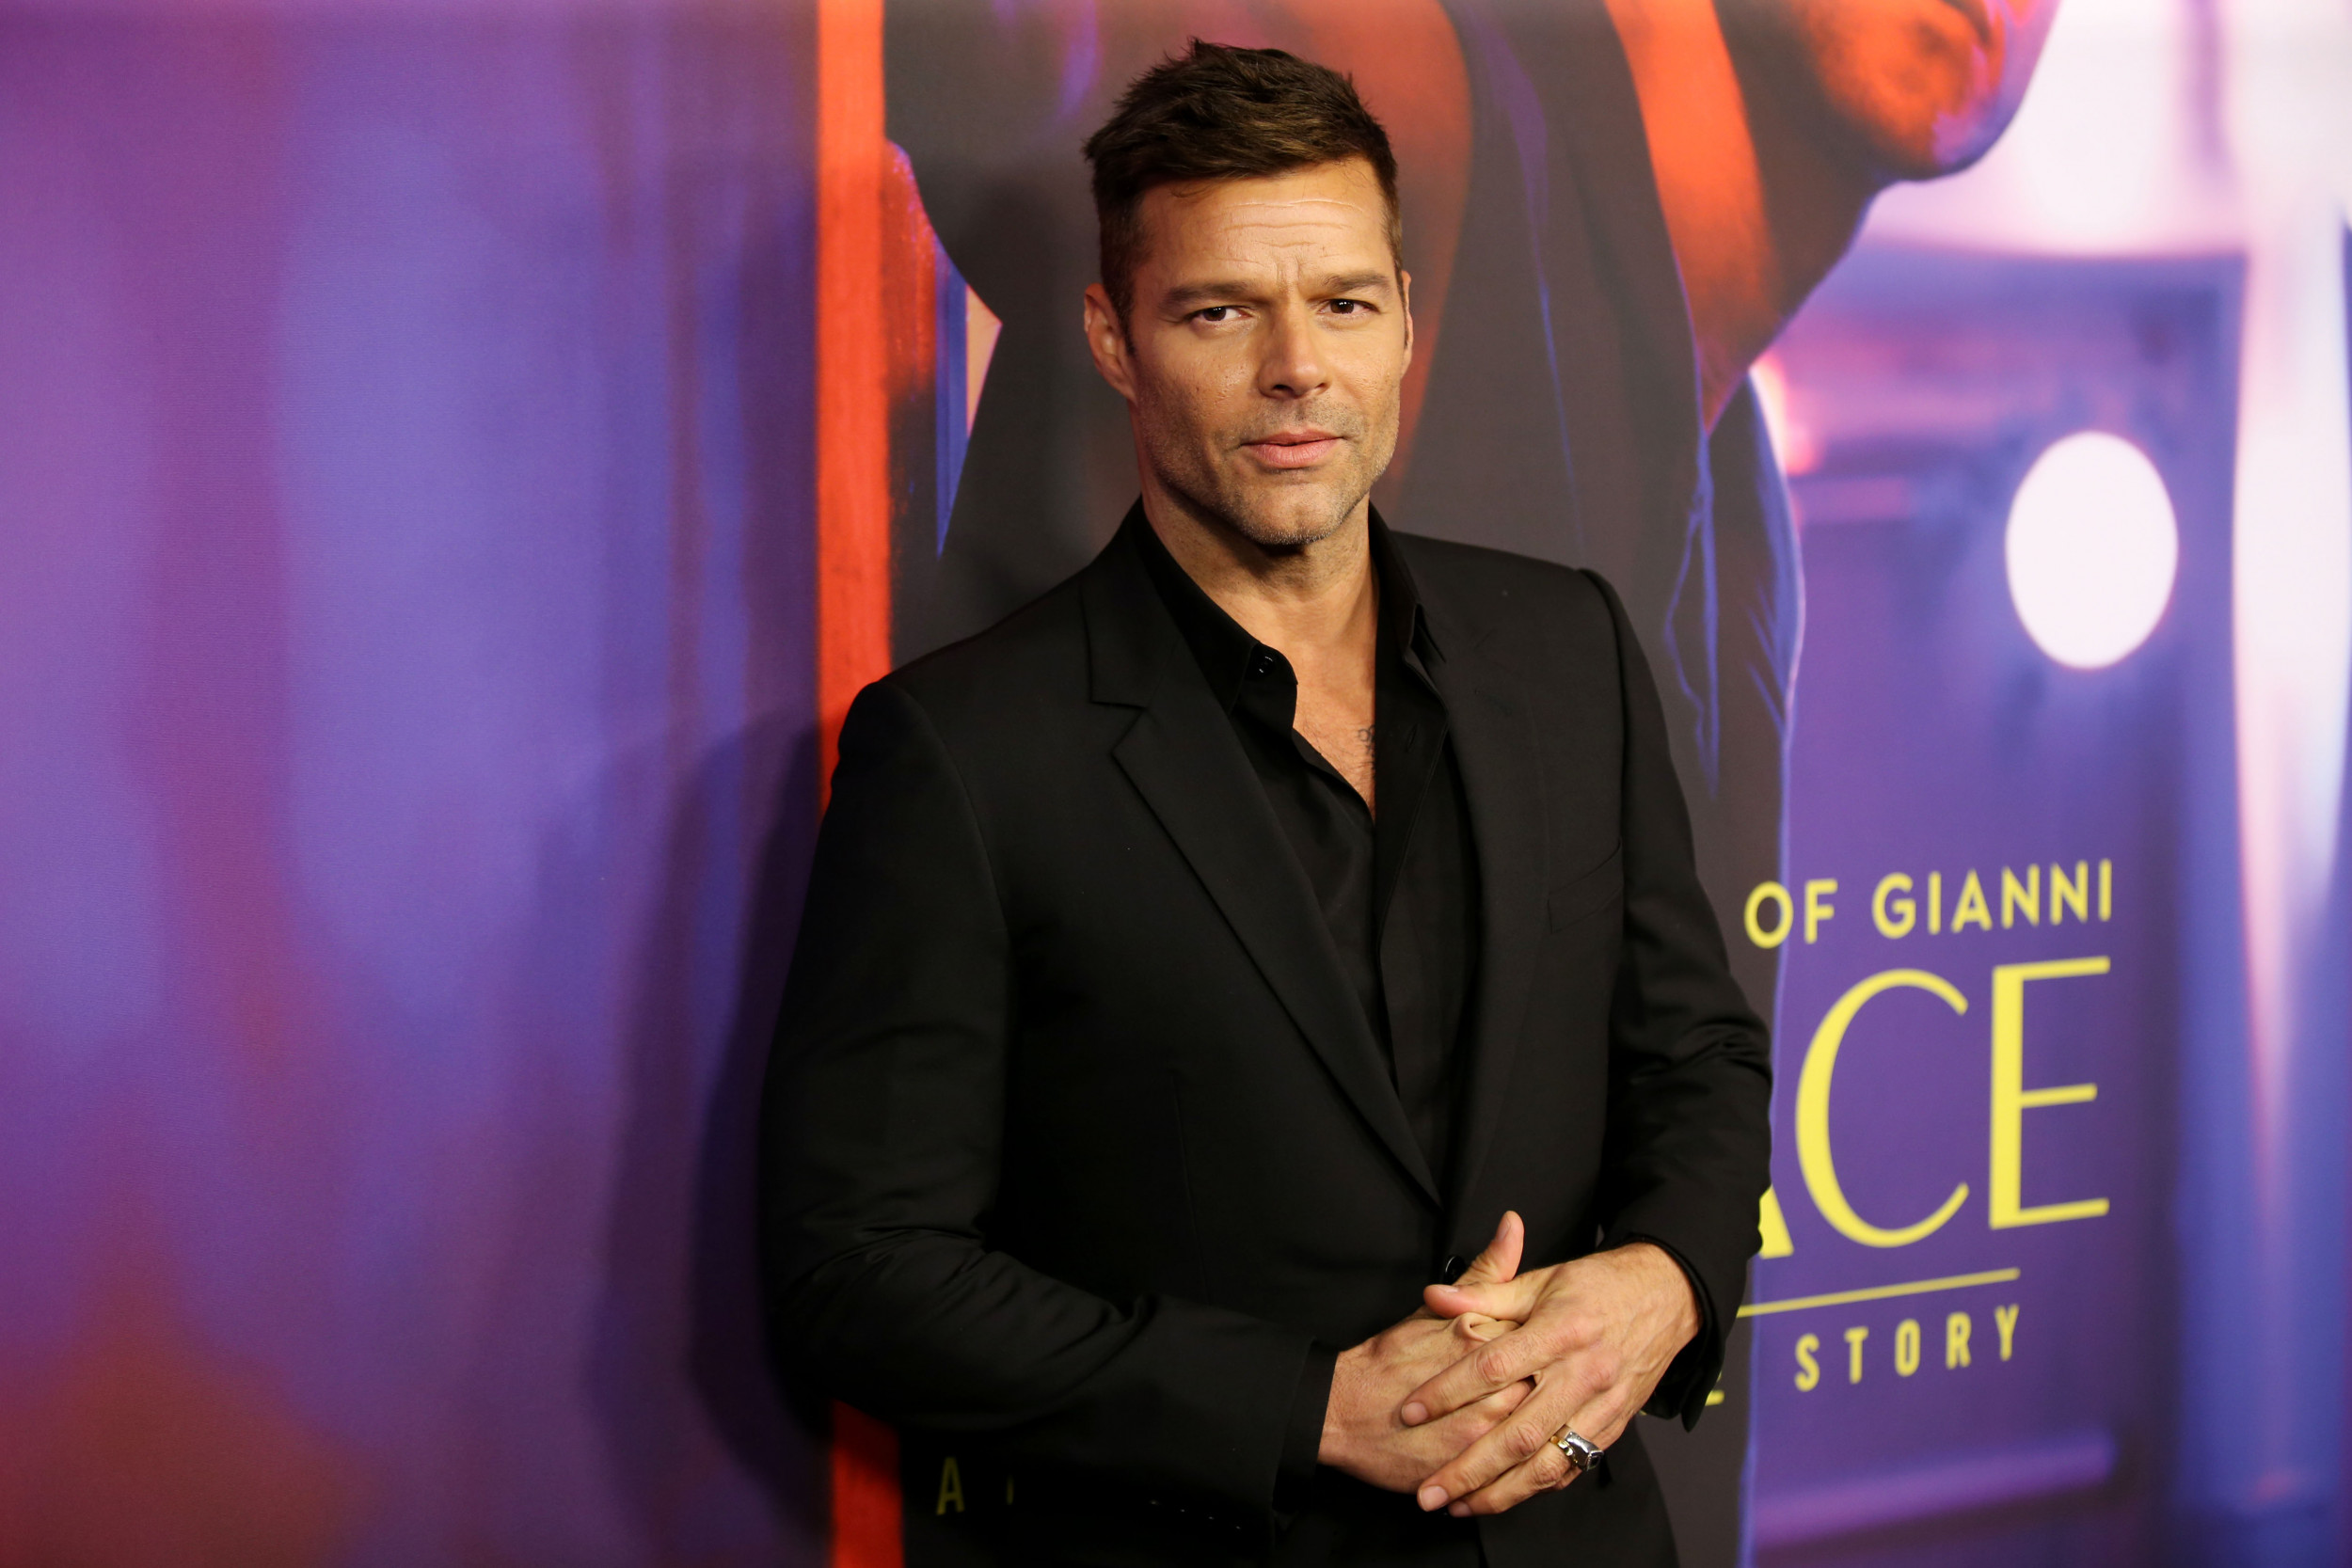 You are currently viewing Ricky Martin Accused of Having Relations With Nephew, Could Face 50 Years